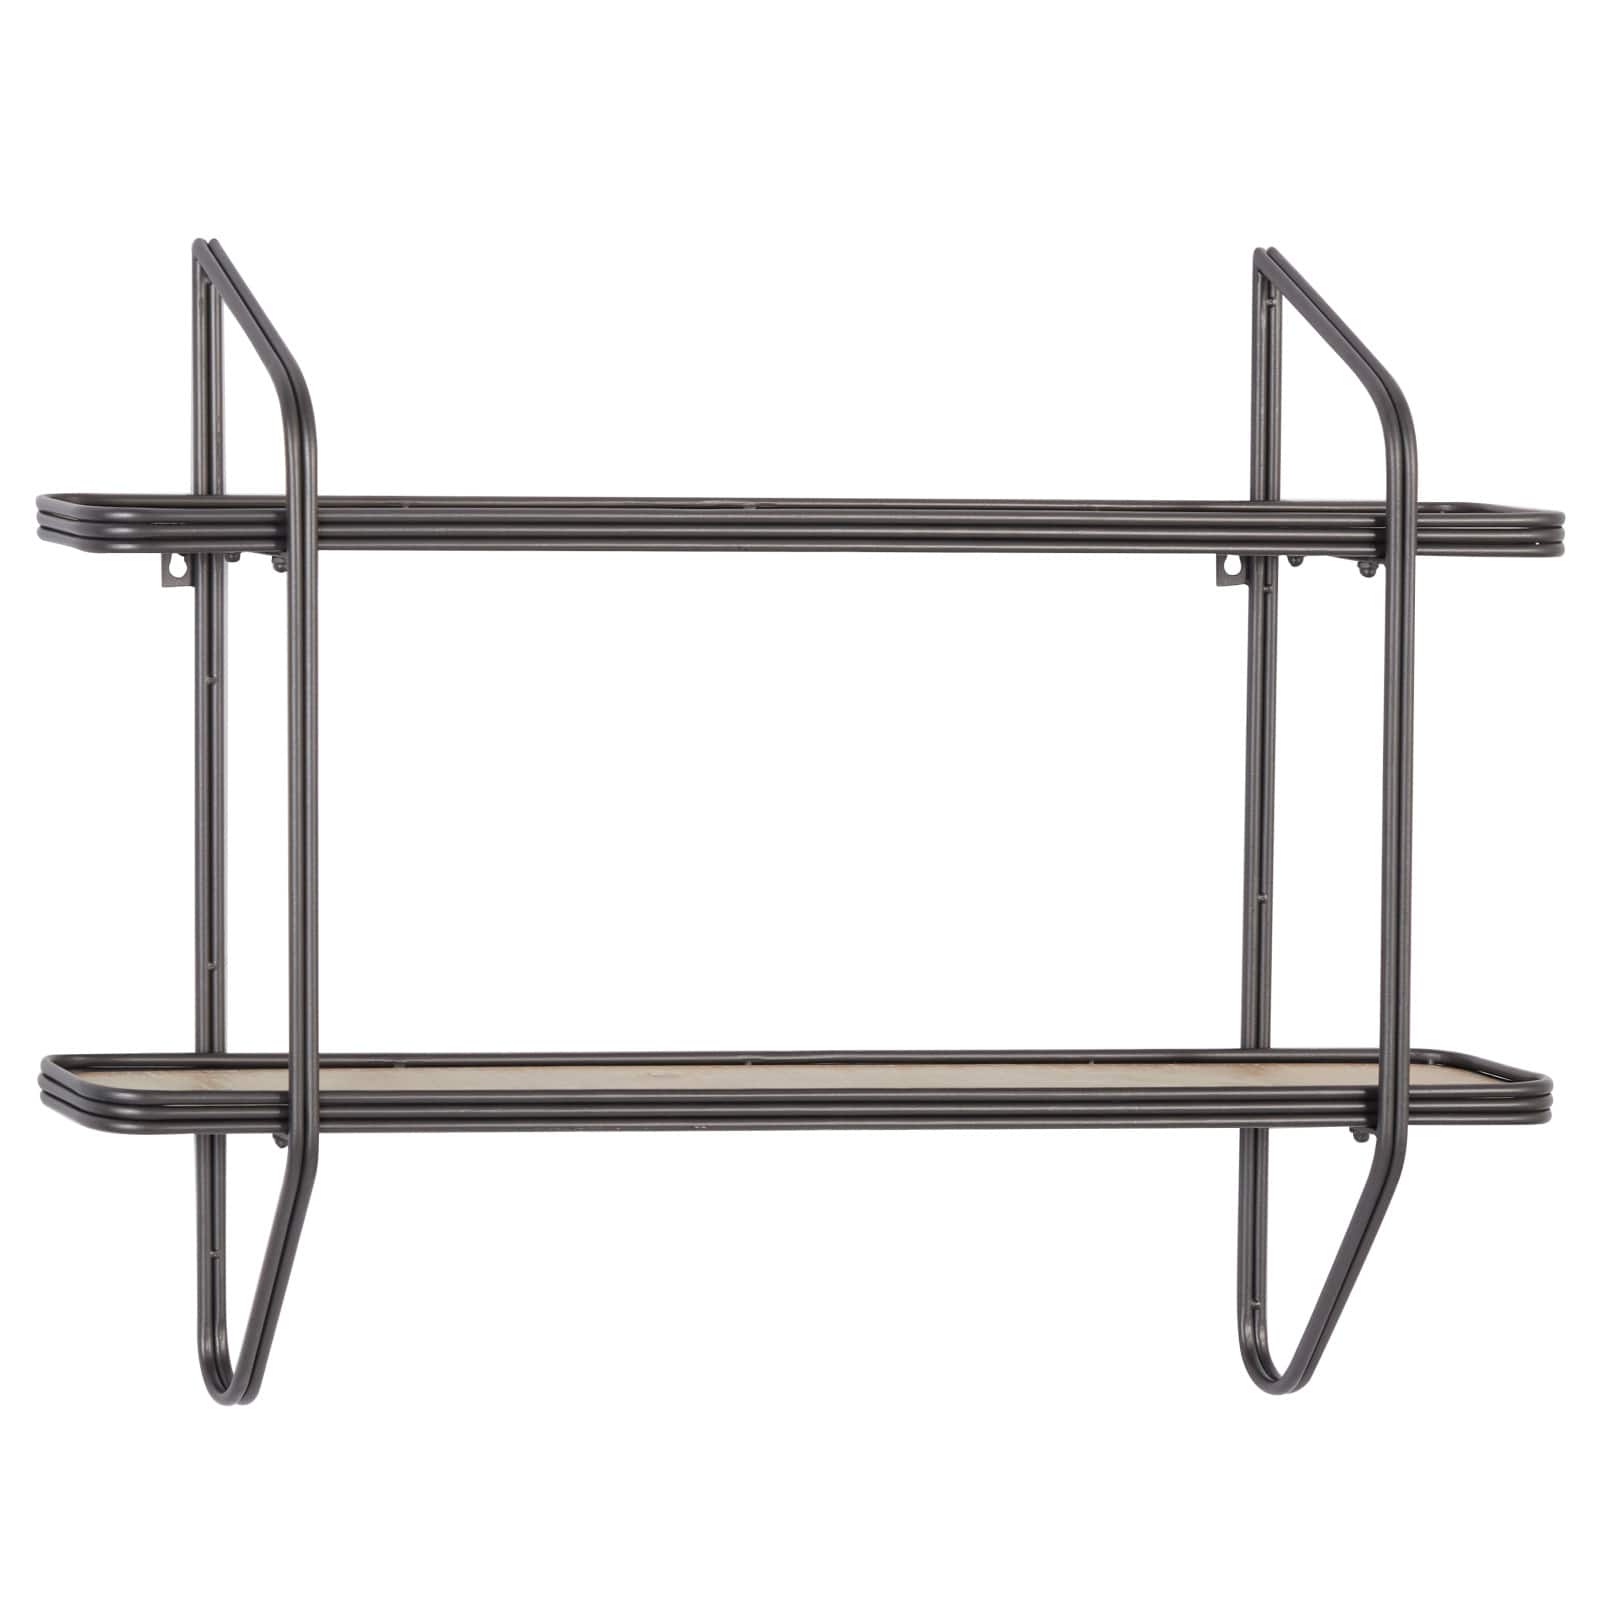 Black Iron and Wood Industrial Wall Shelves, 23